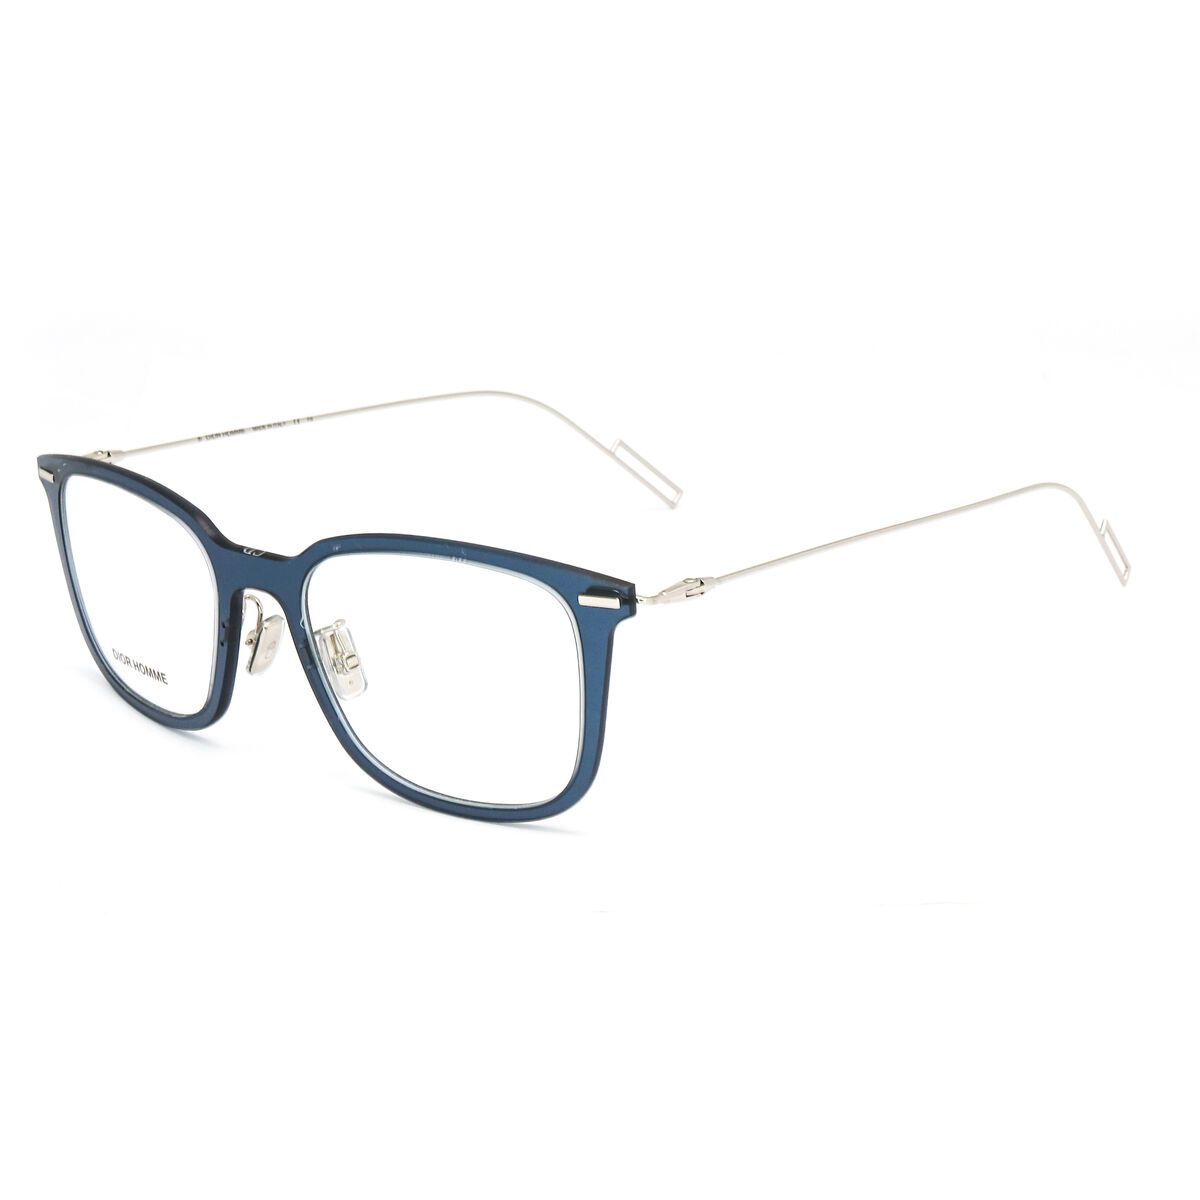 DIORDISAPPEARO2 Square Eyeglasses PJP - size  52